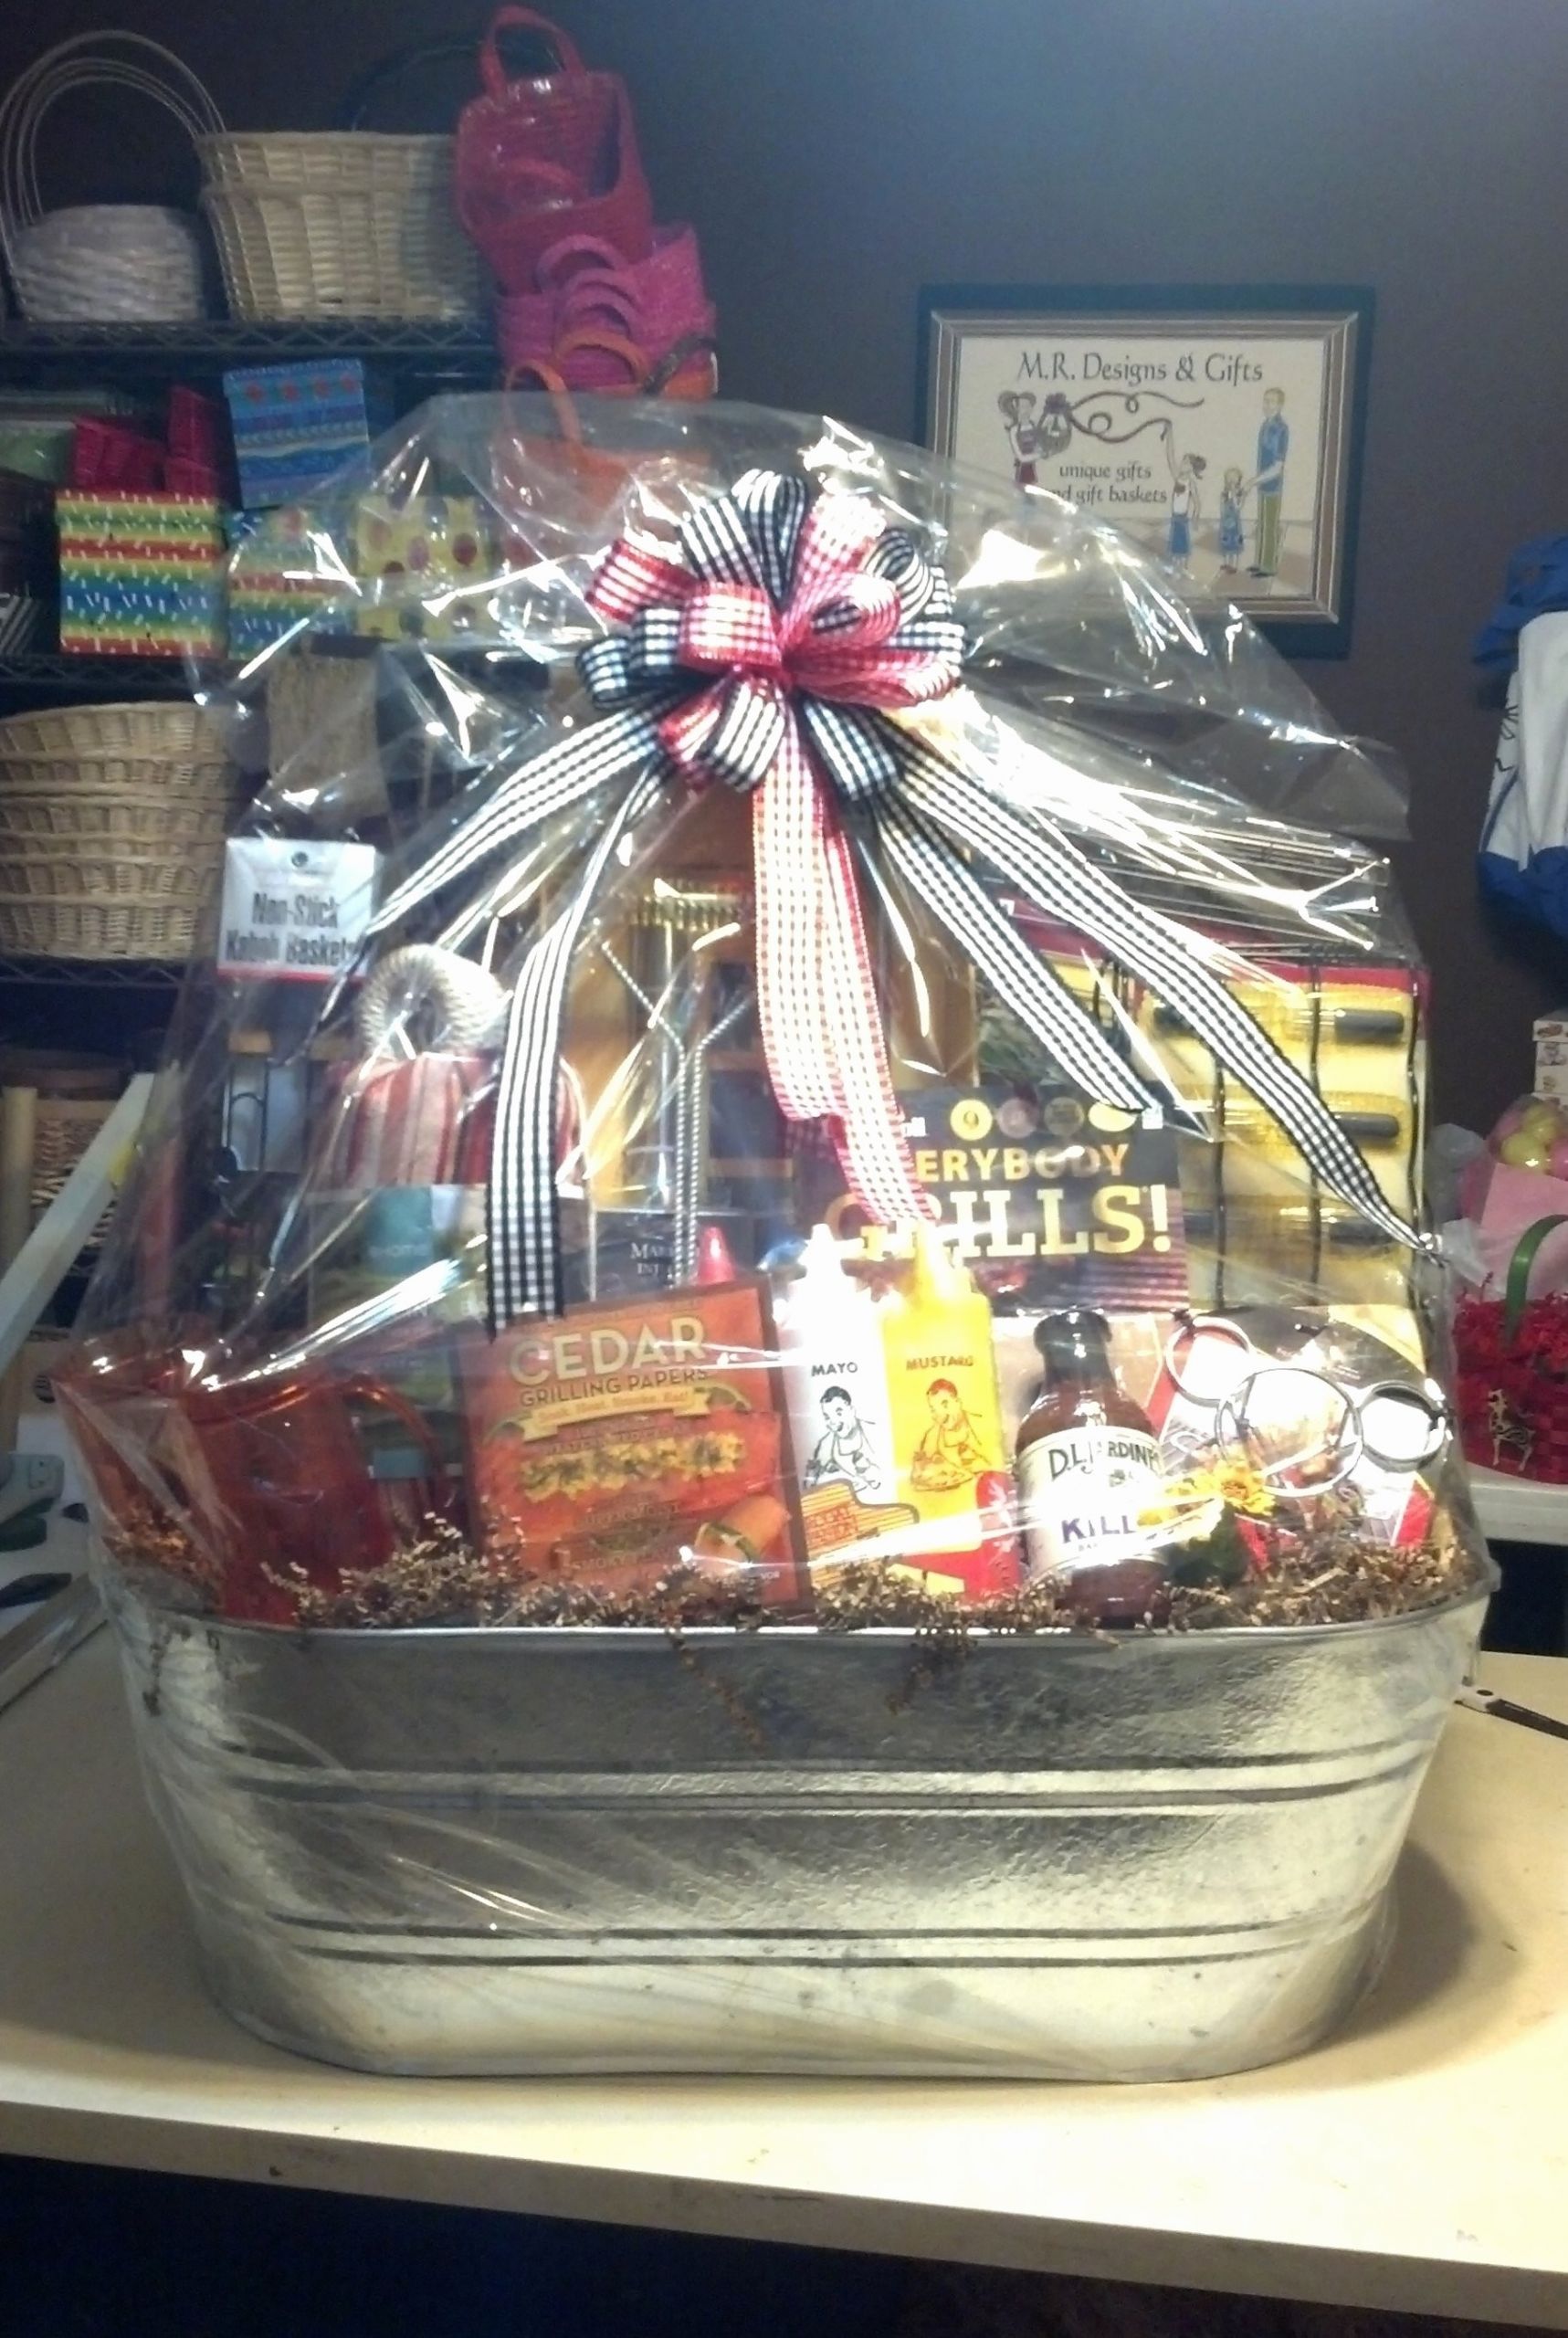 Themed Gift Basket Ideas For Auctions
 10 Wonderful Gift Basket Ideas For Silent Auction 2019